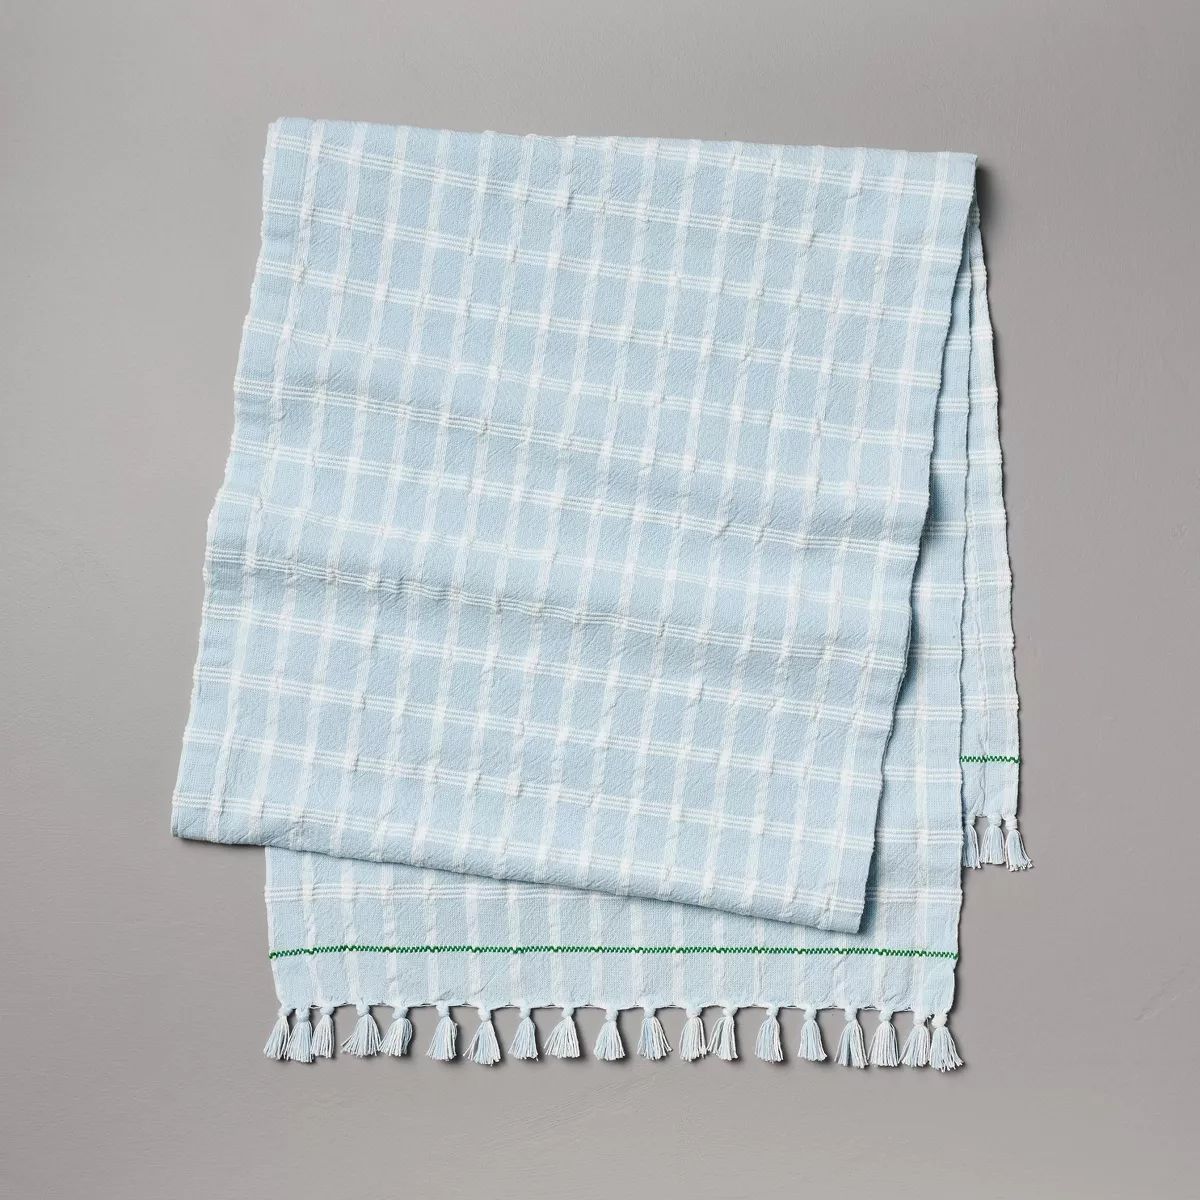 20"x90" Stitched Plaid Woven Table Runner - Hearth & Hand™ with Magnolia | Target